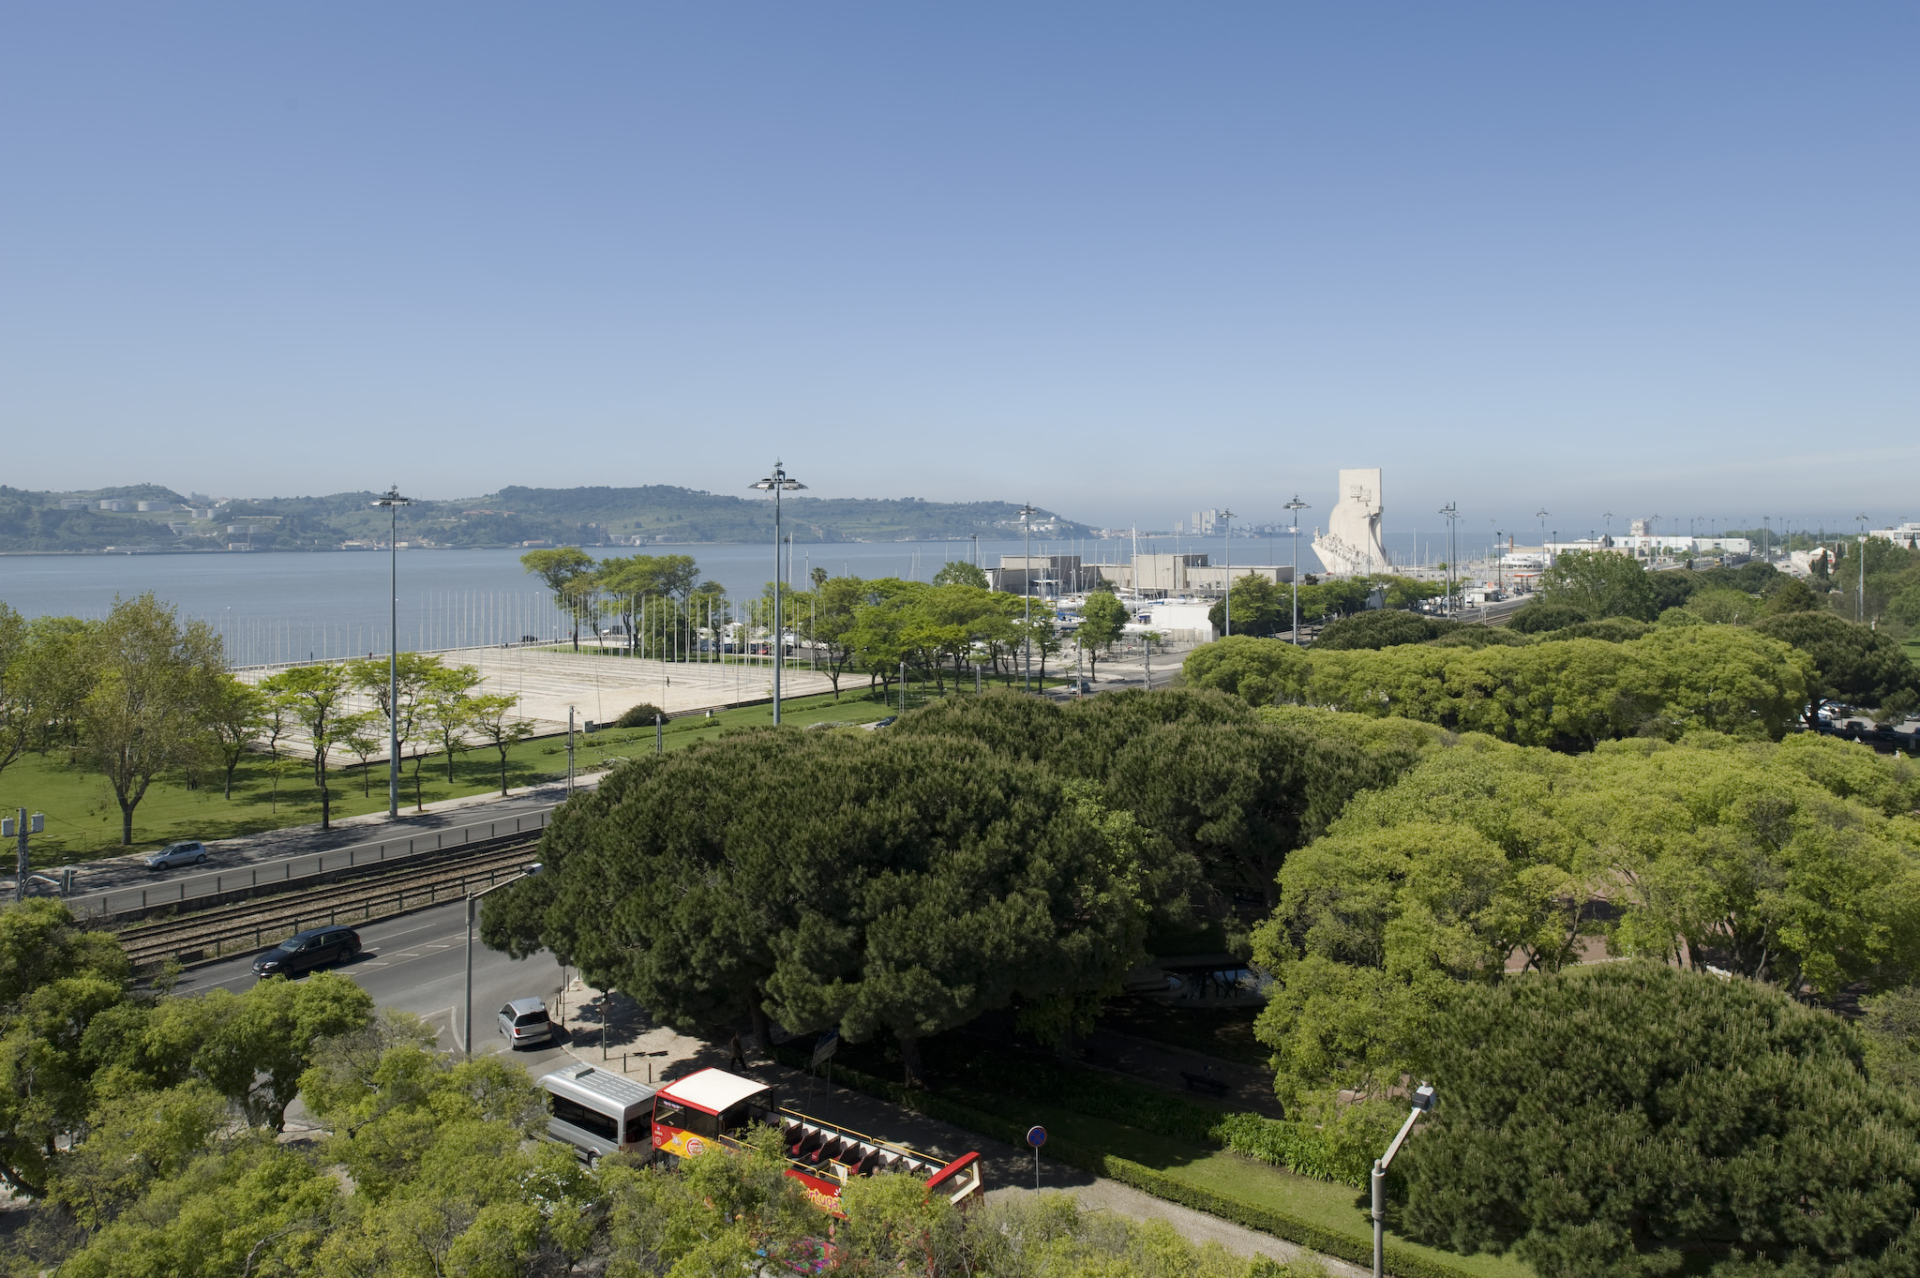 Zona de Belem that can be seen from the top of the Museu Nacional dos Coches